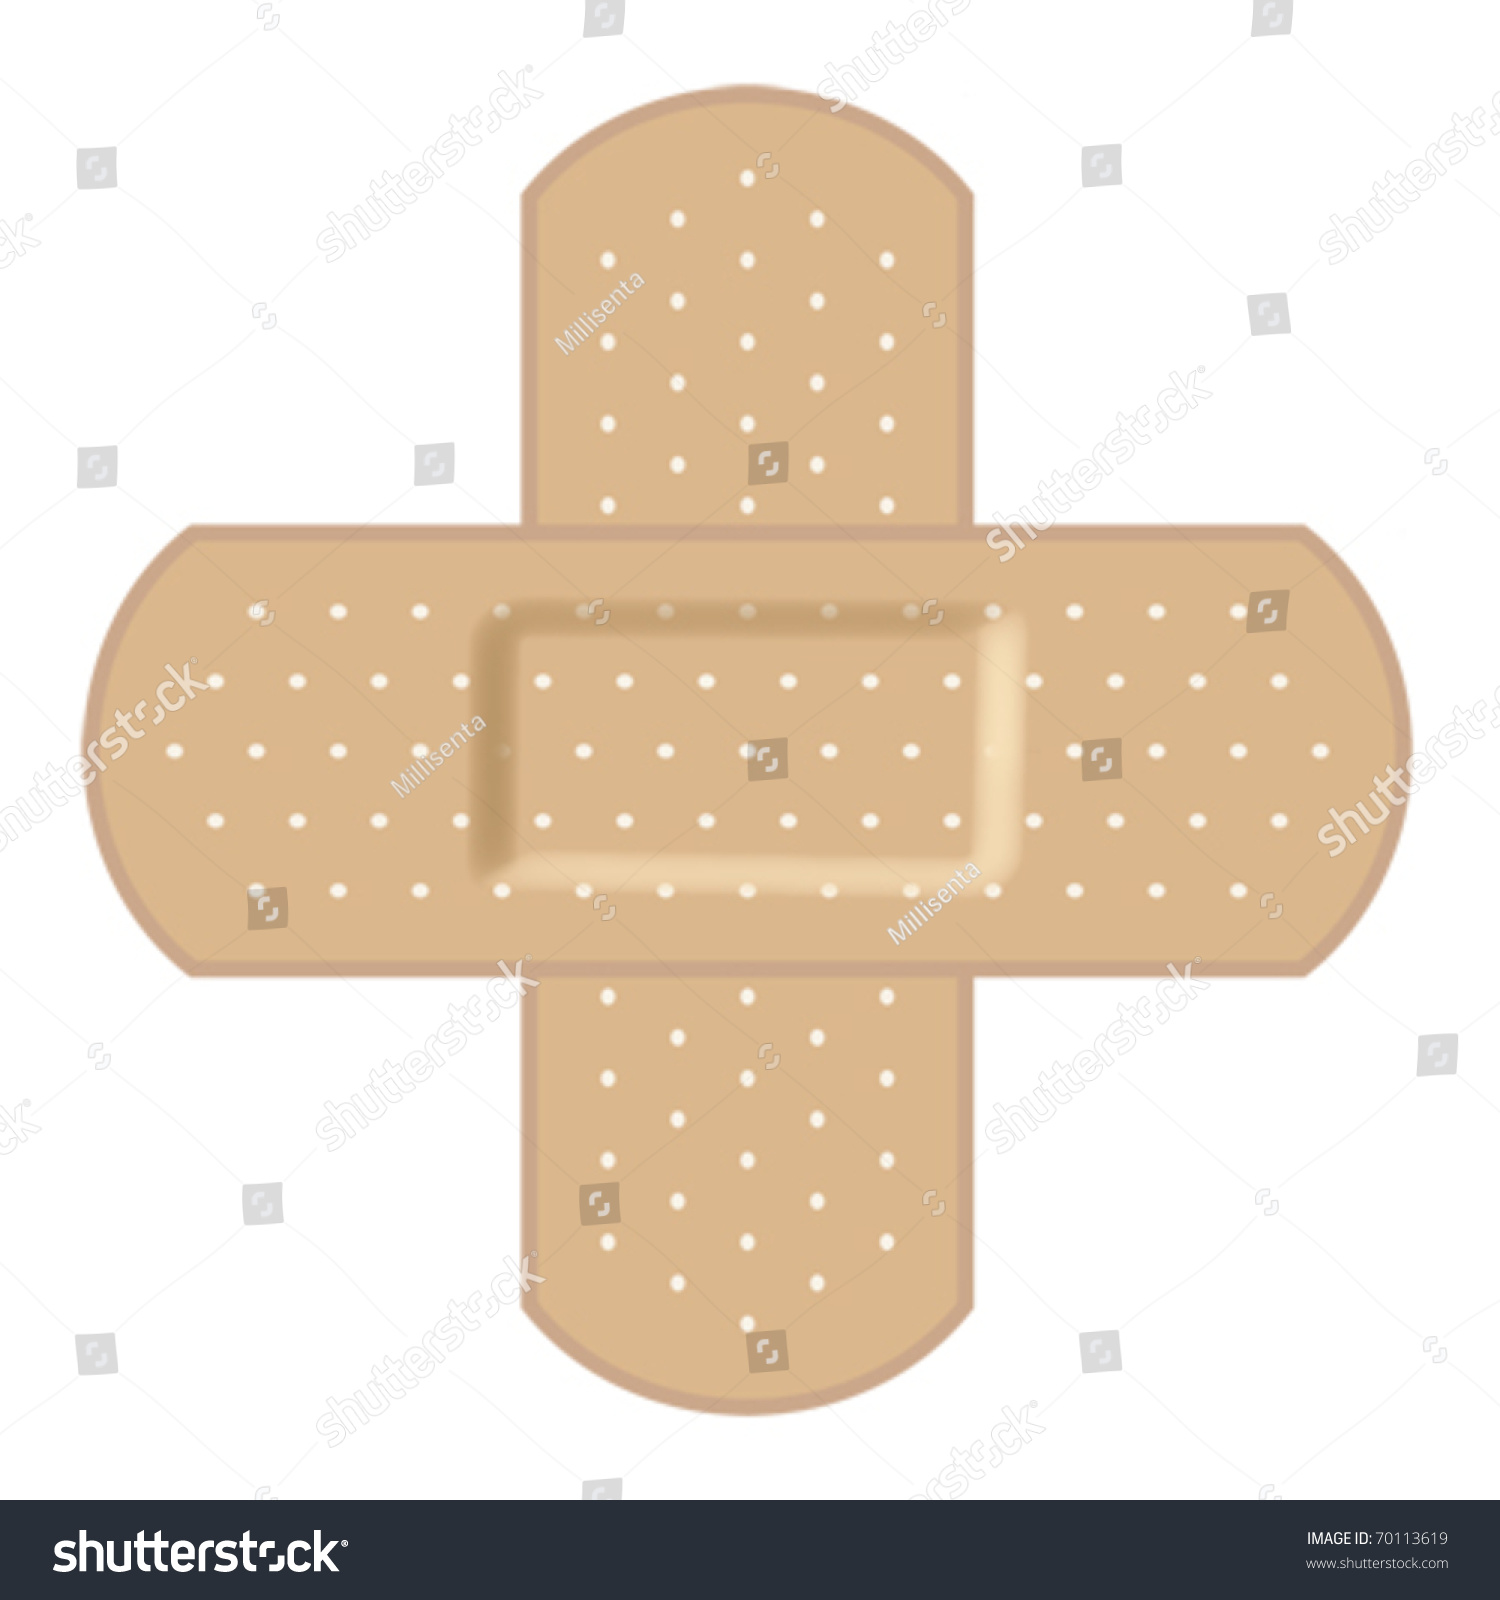 Adhesive Bandages Forming Cross Stock Vector 70113619 - Shutterstock